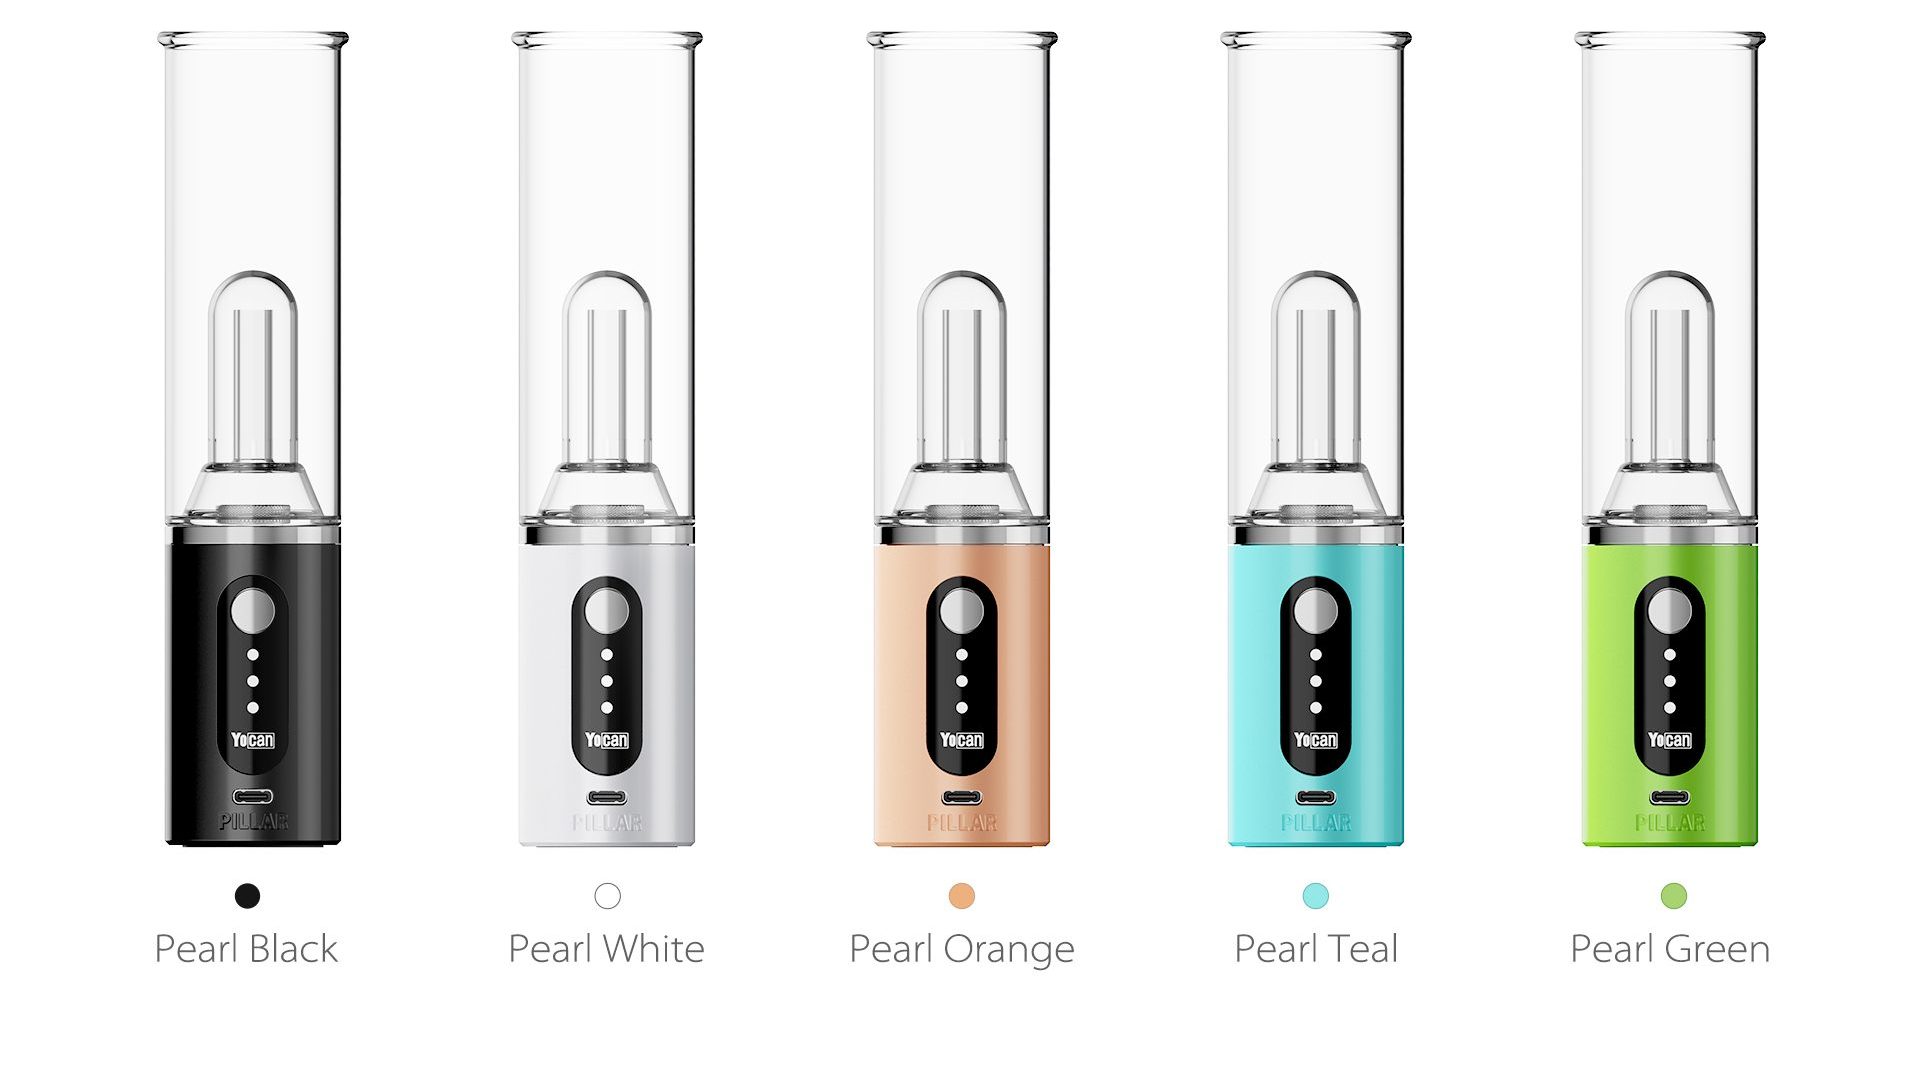 Yocan Pillar Erig comes with 5 colors.